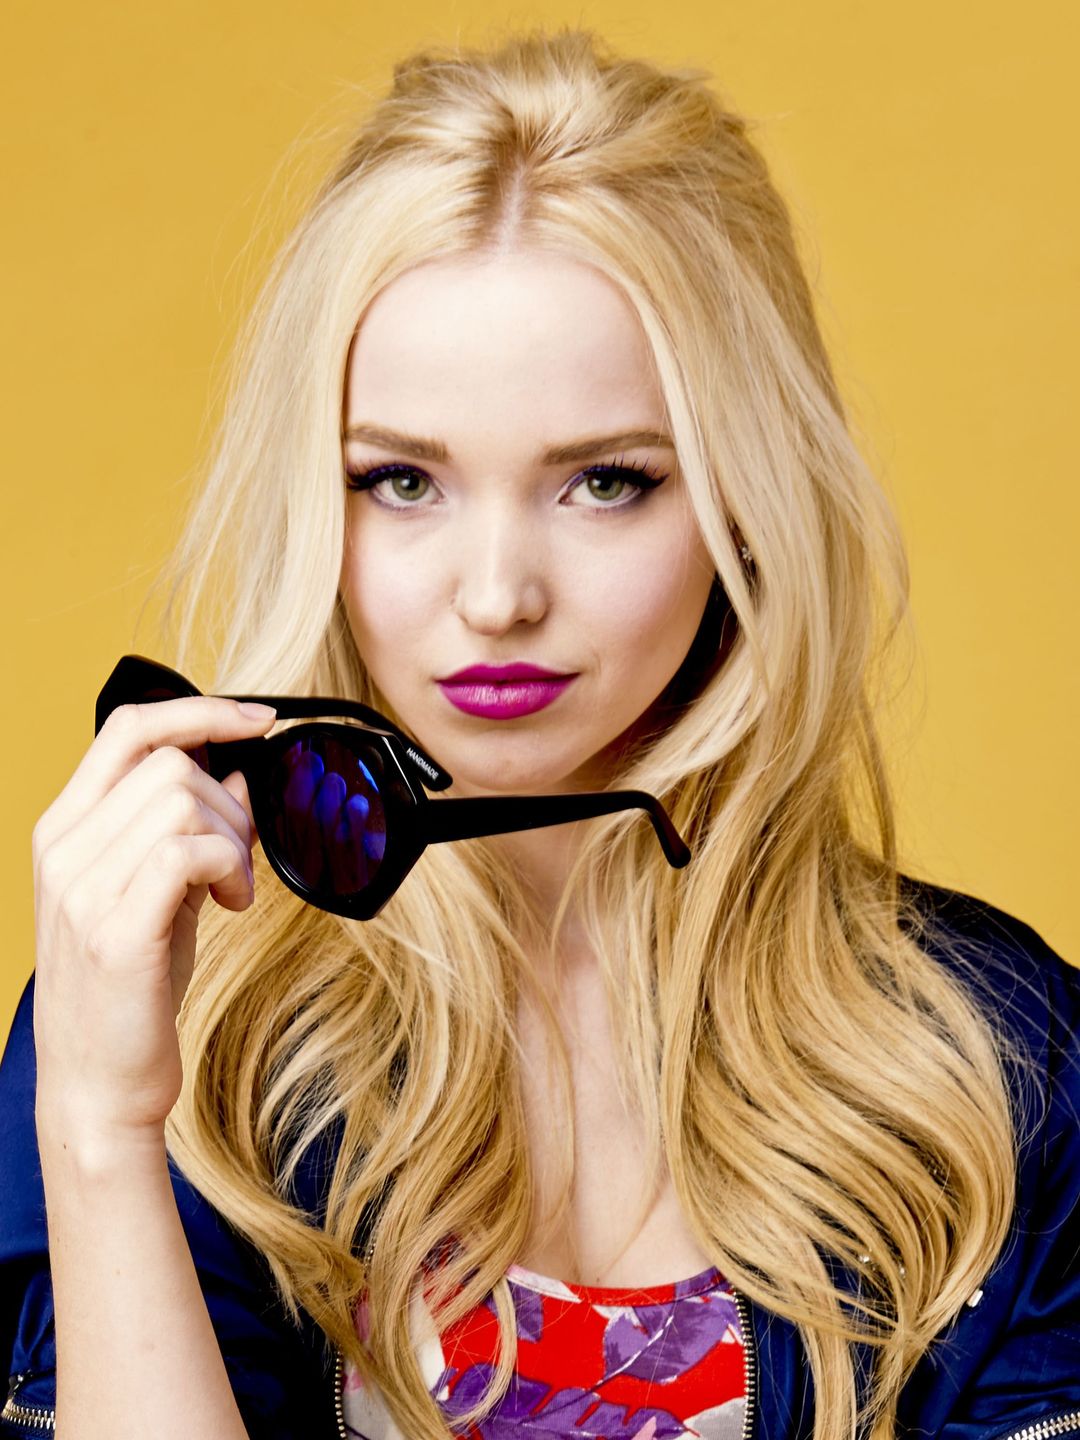 Dove Cameron unphotoshopped pictures